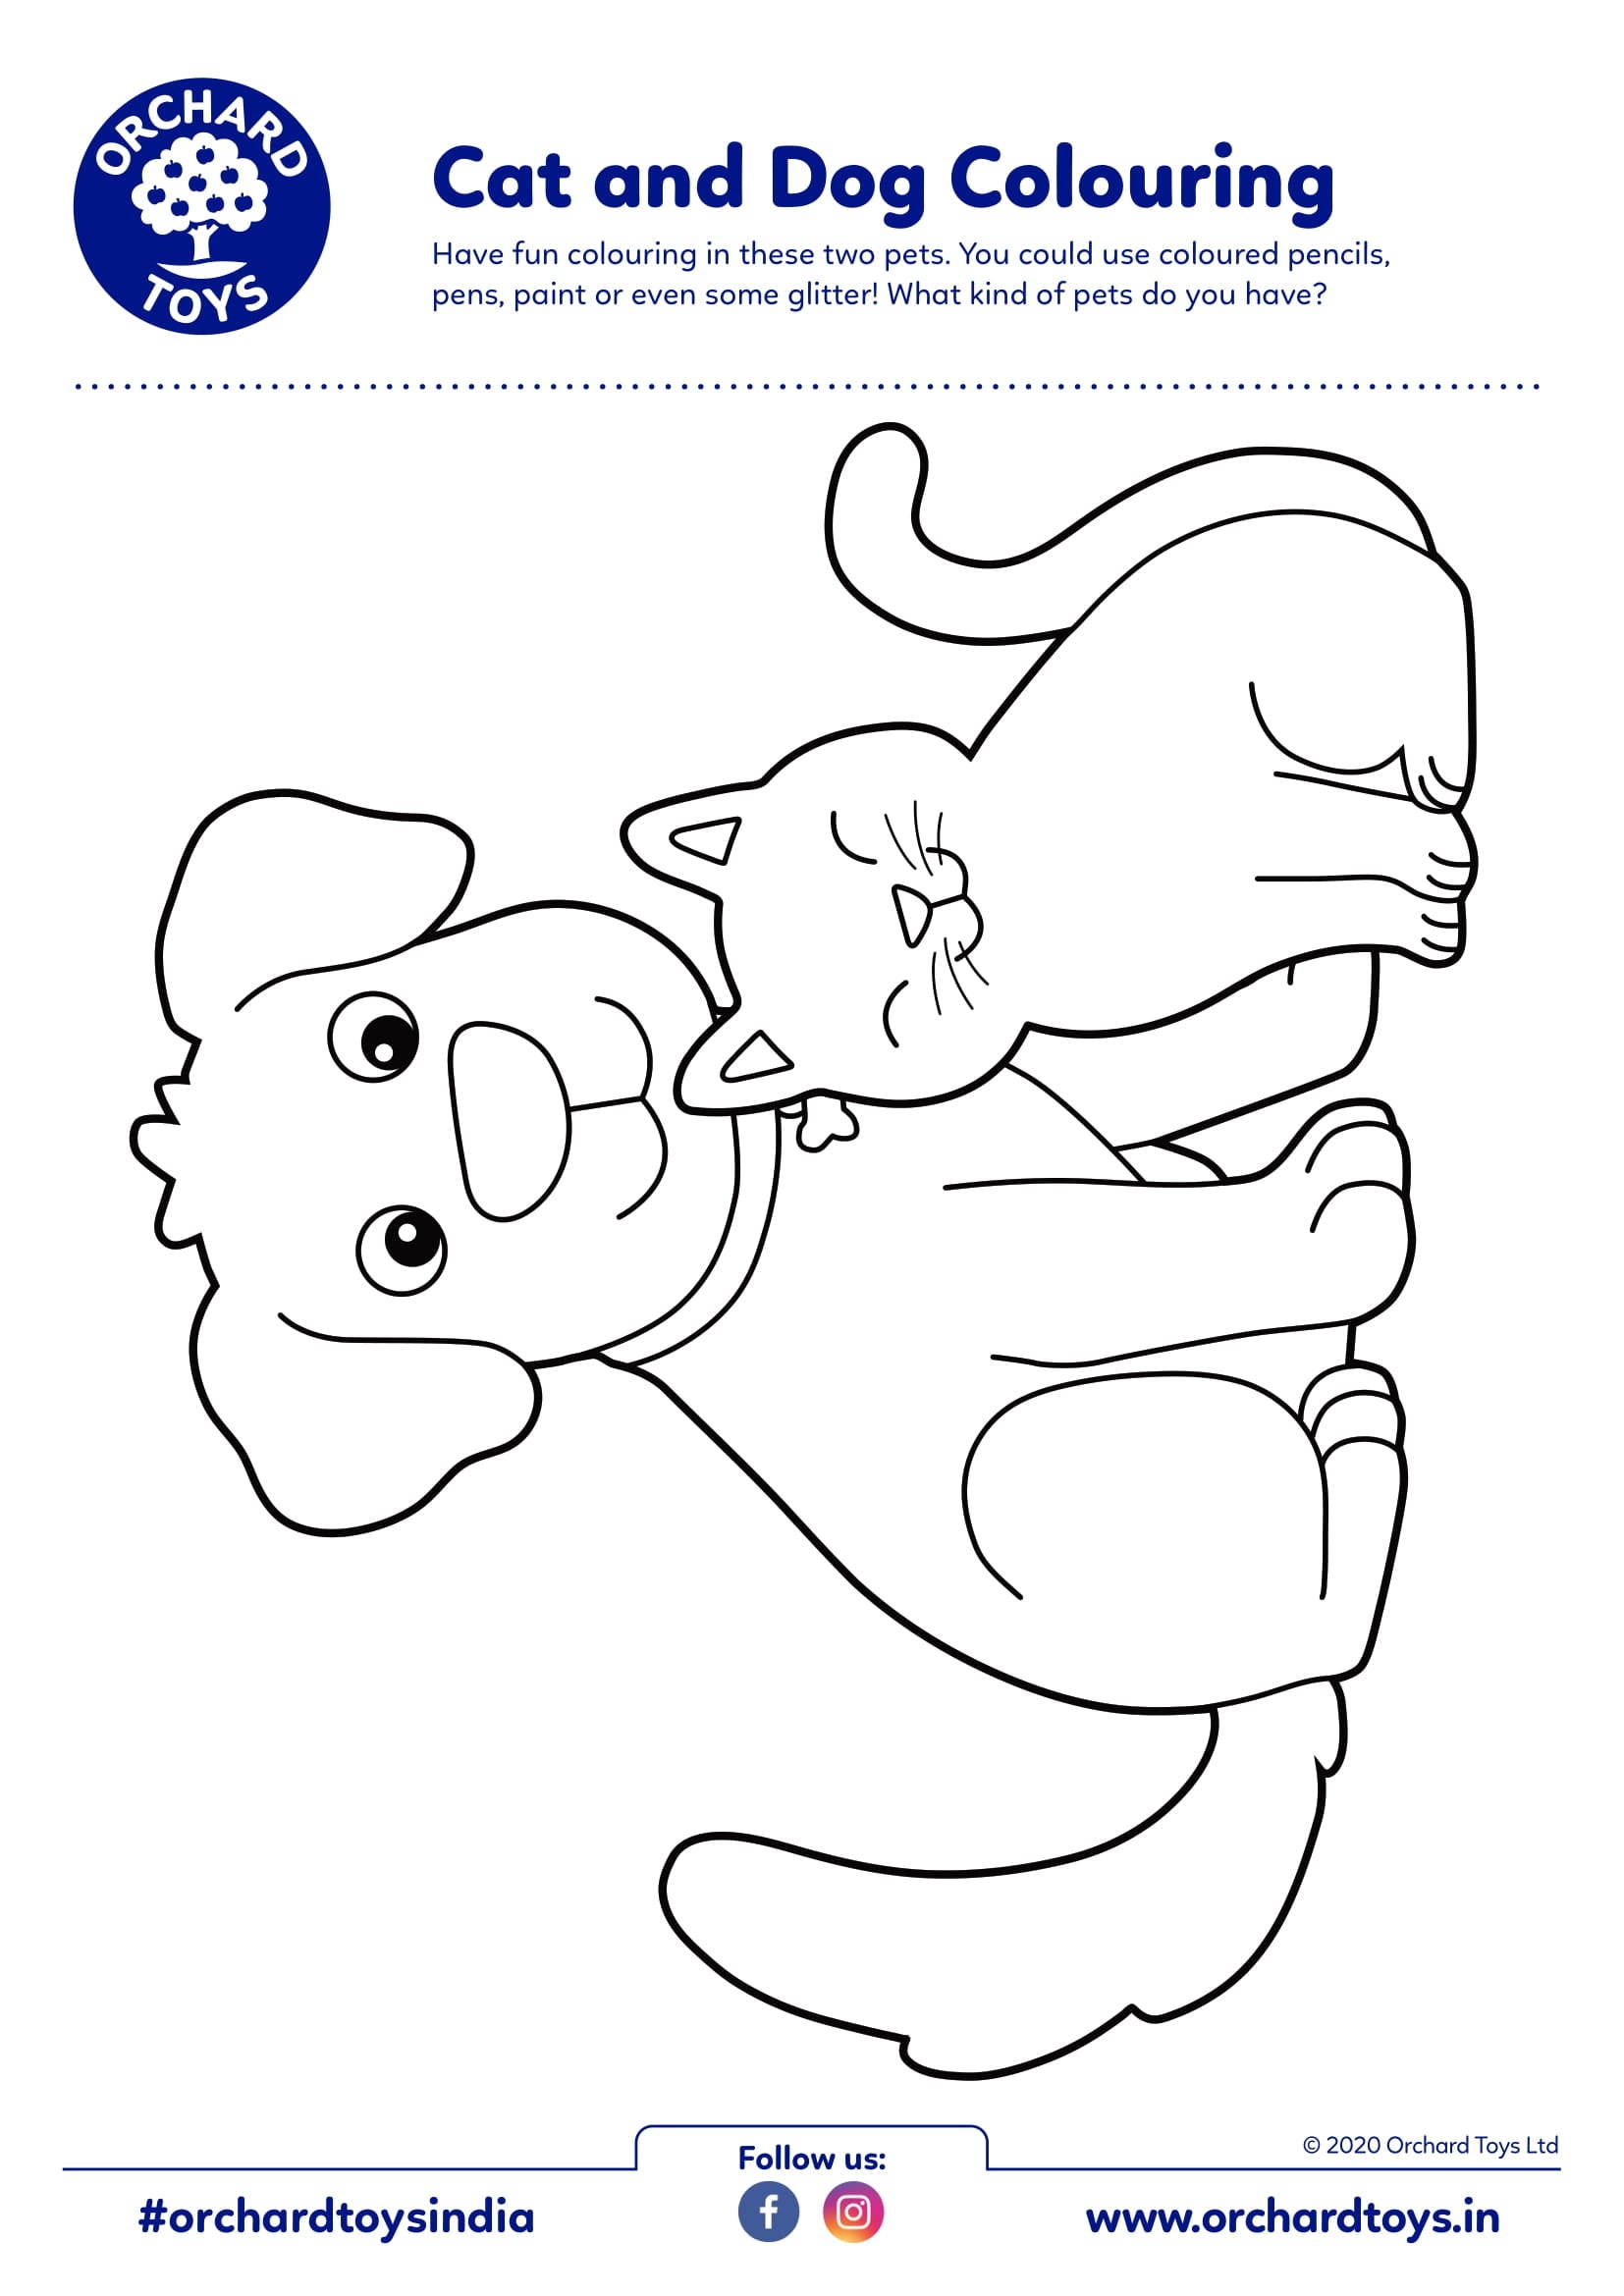 Cat and Dog Coloring Activity